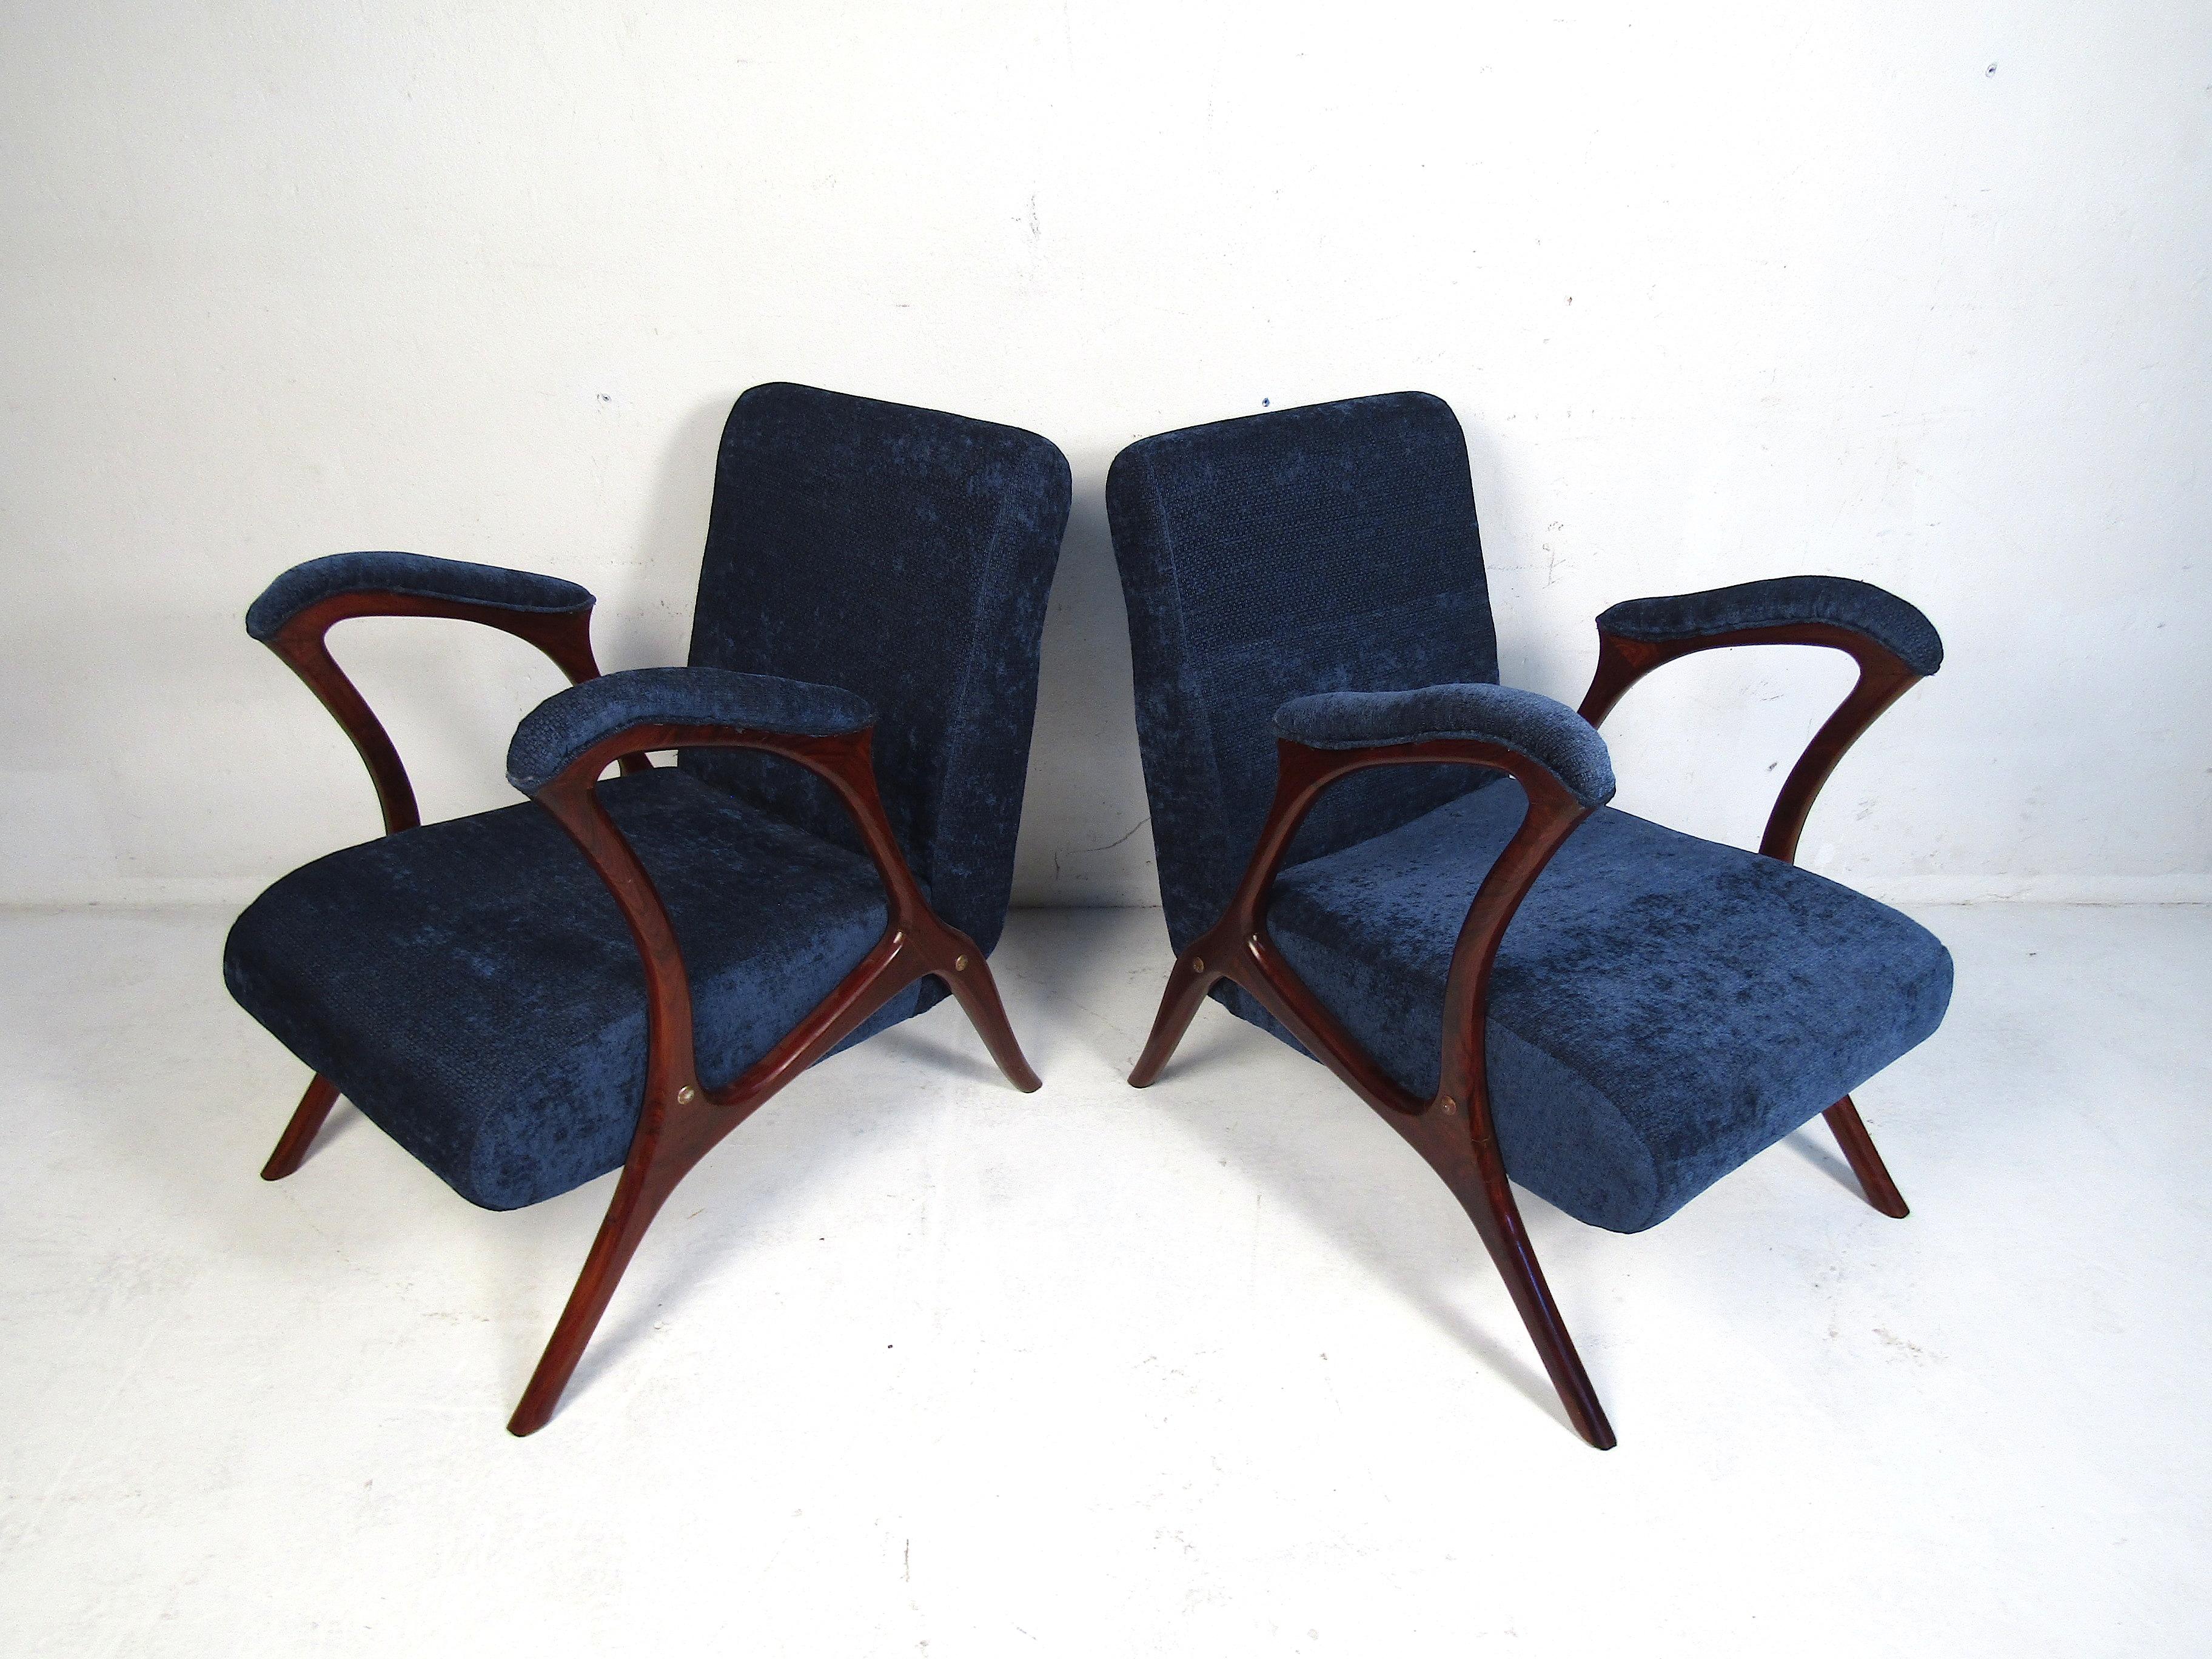 Very unusual pair of midcentury armchairs. Sculpted rosewood frames with high armrests (27 inches high) and dark blue upholstery. This pair would make an interesting addition to any modern interior. Please confirm item location (NJ or NY).